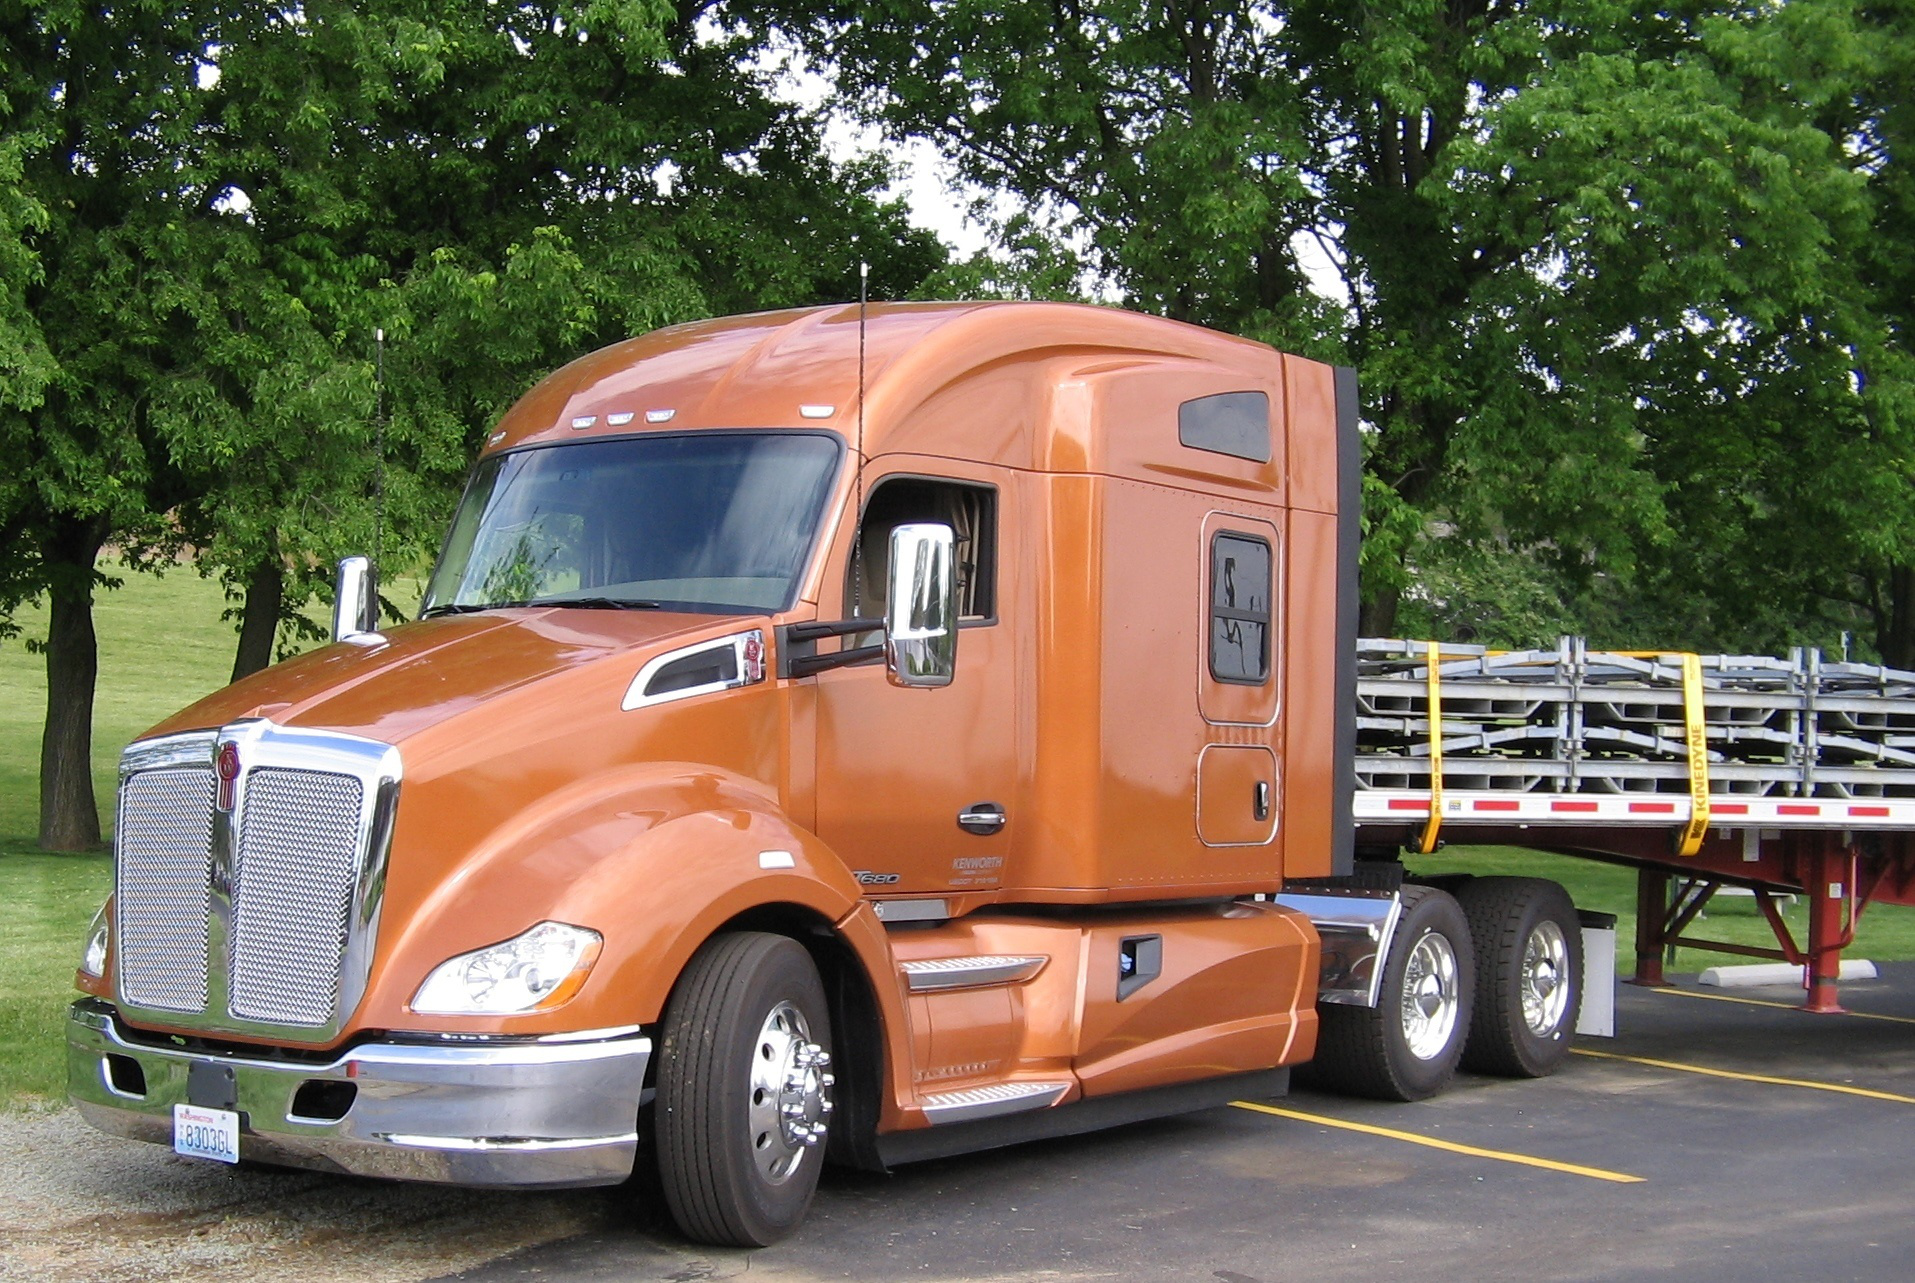 New Kenworth midroof sleeper in production for T680, T880 models